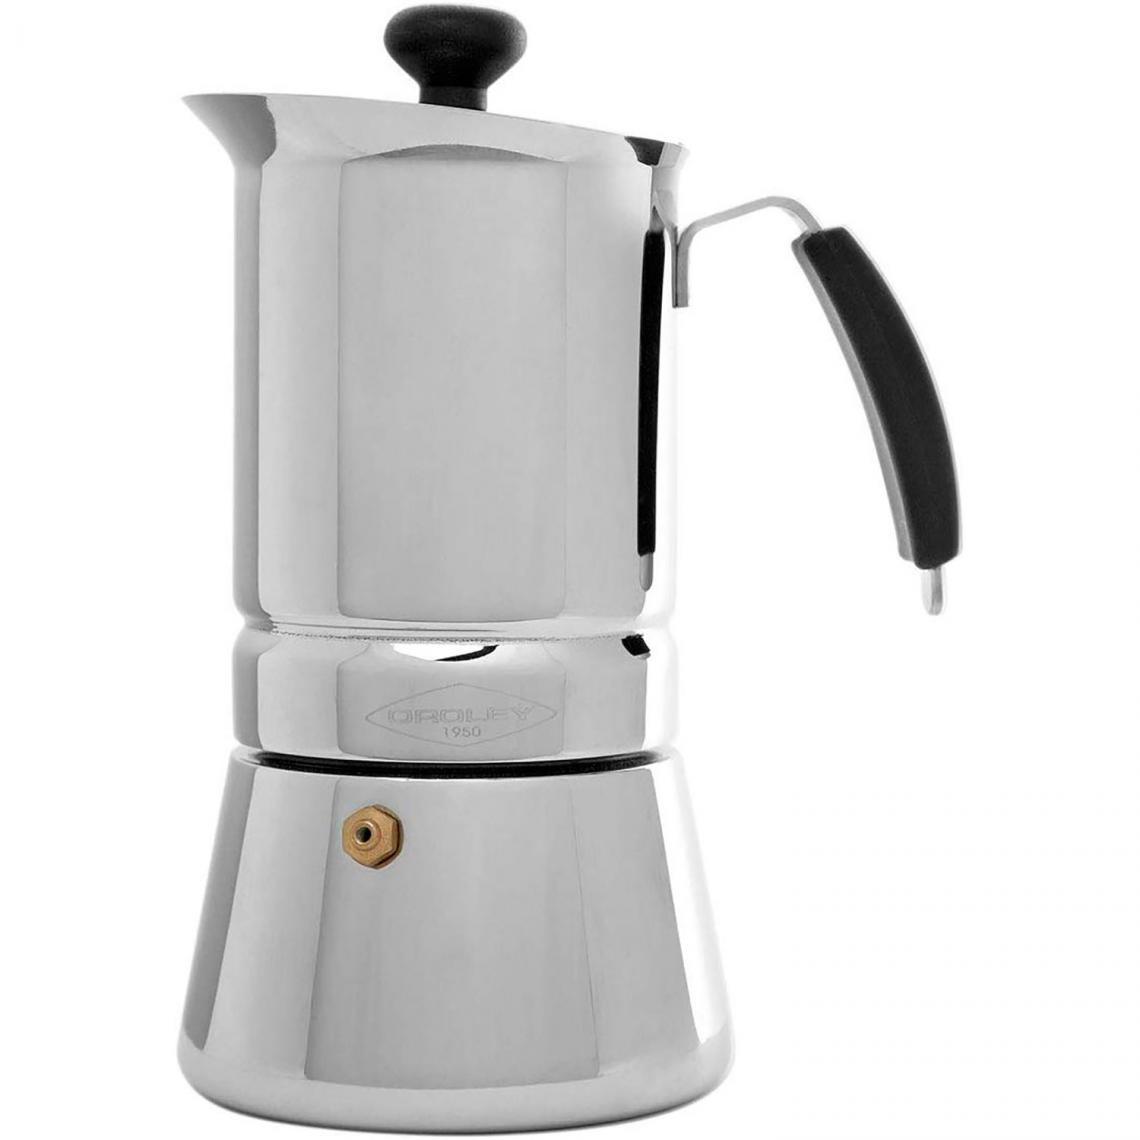 Oroley - Cafetière Italienne Induction 6 Tasses, Cafetière Expresso en INOX Oroley ARGES - Expresso - Cafetière